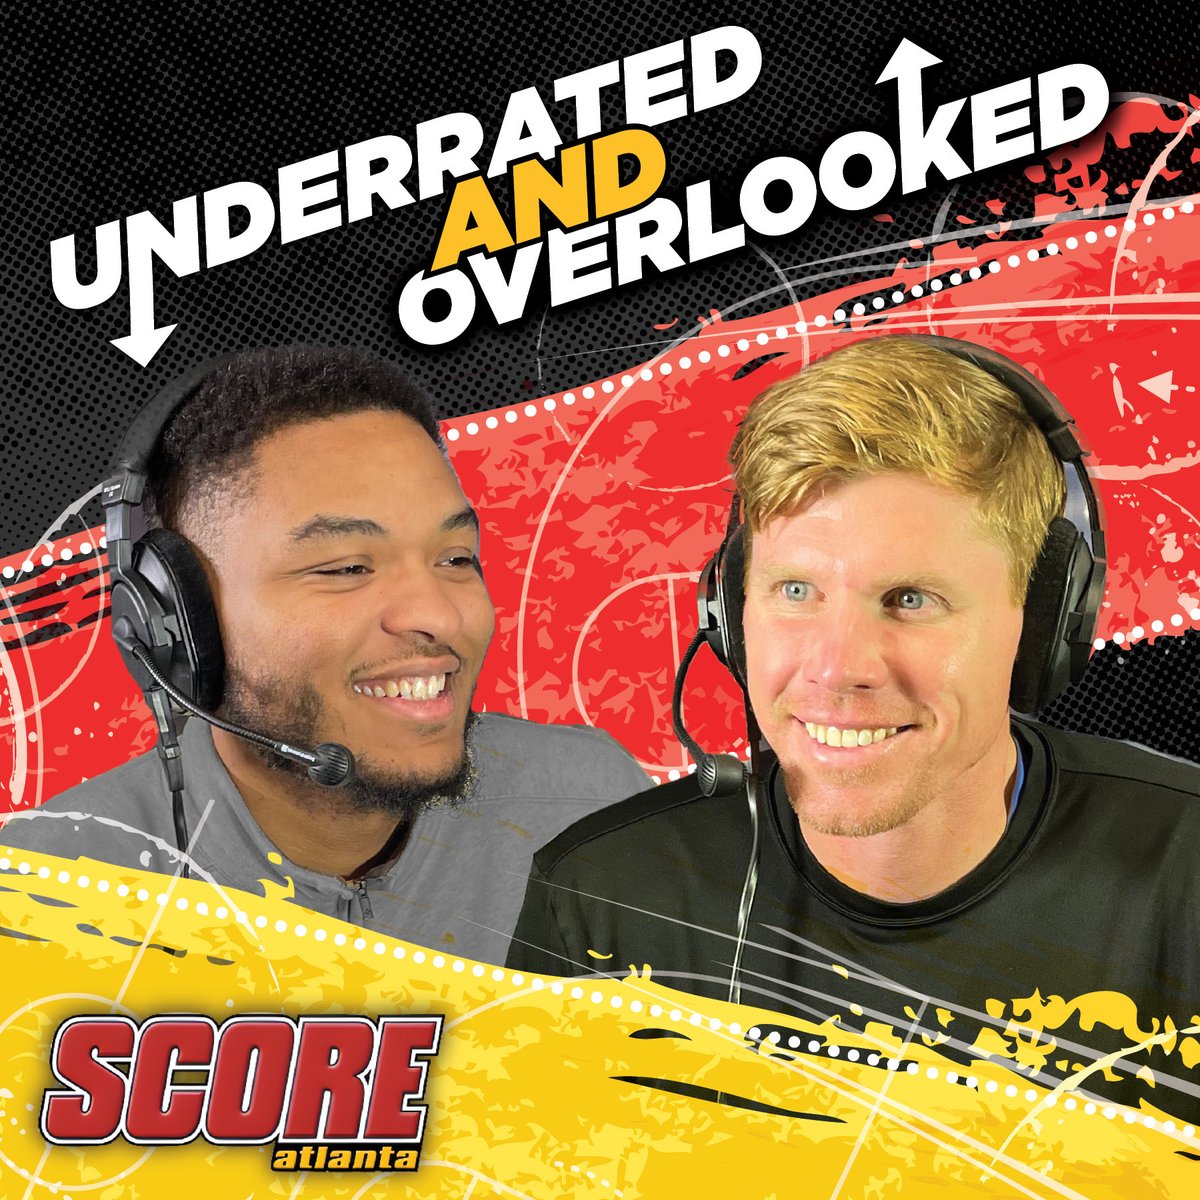 Watch the latest episode of Underrated and Overlooked with @najehwilk & @CraigSagerJr today at Noon. They will talk latest coaching changes, college football, & reaction to the Superbowl. Make sure to check them out. Stream: youtube.com/watch?v=ao2OvI…